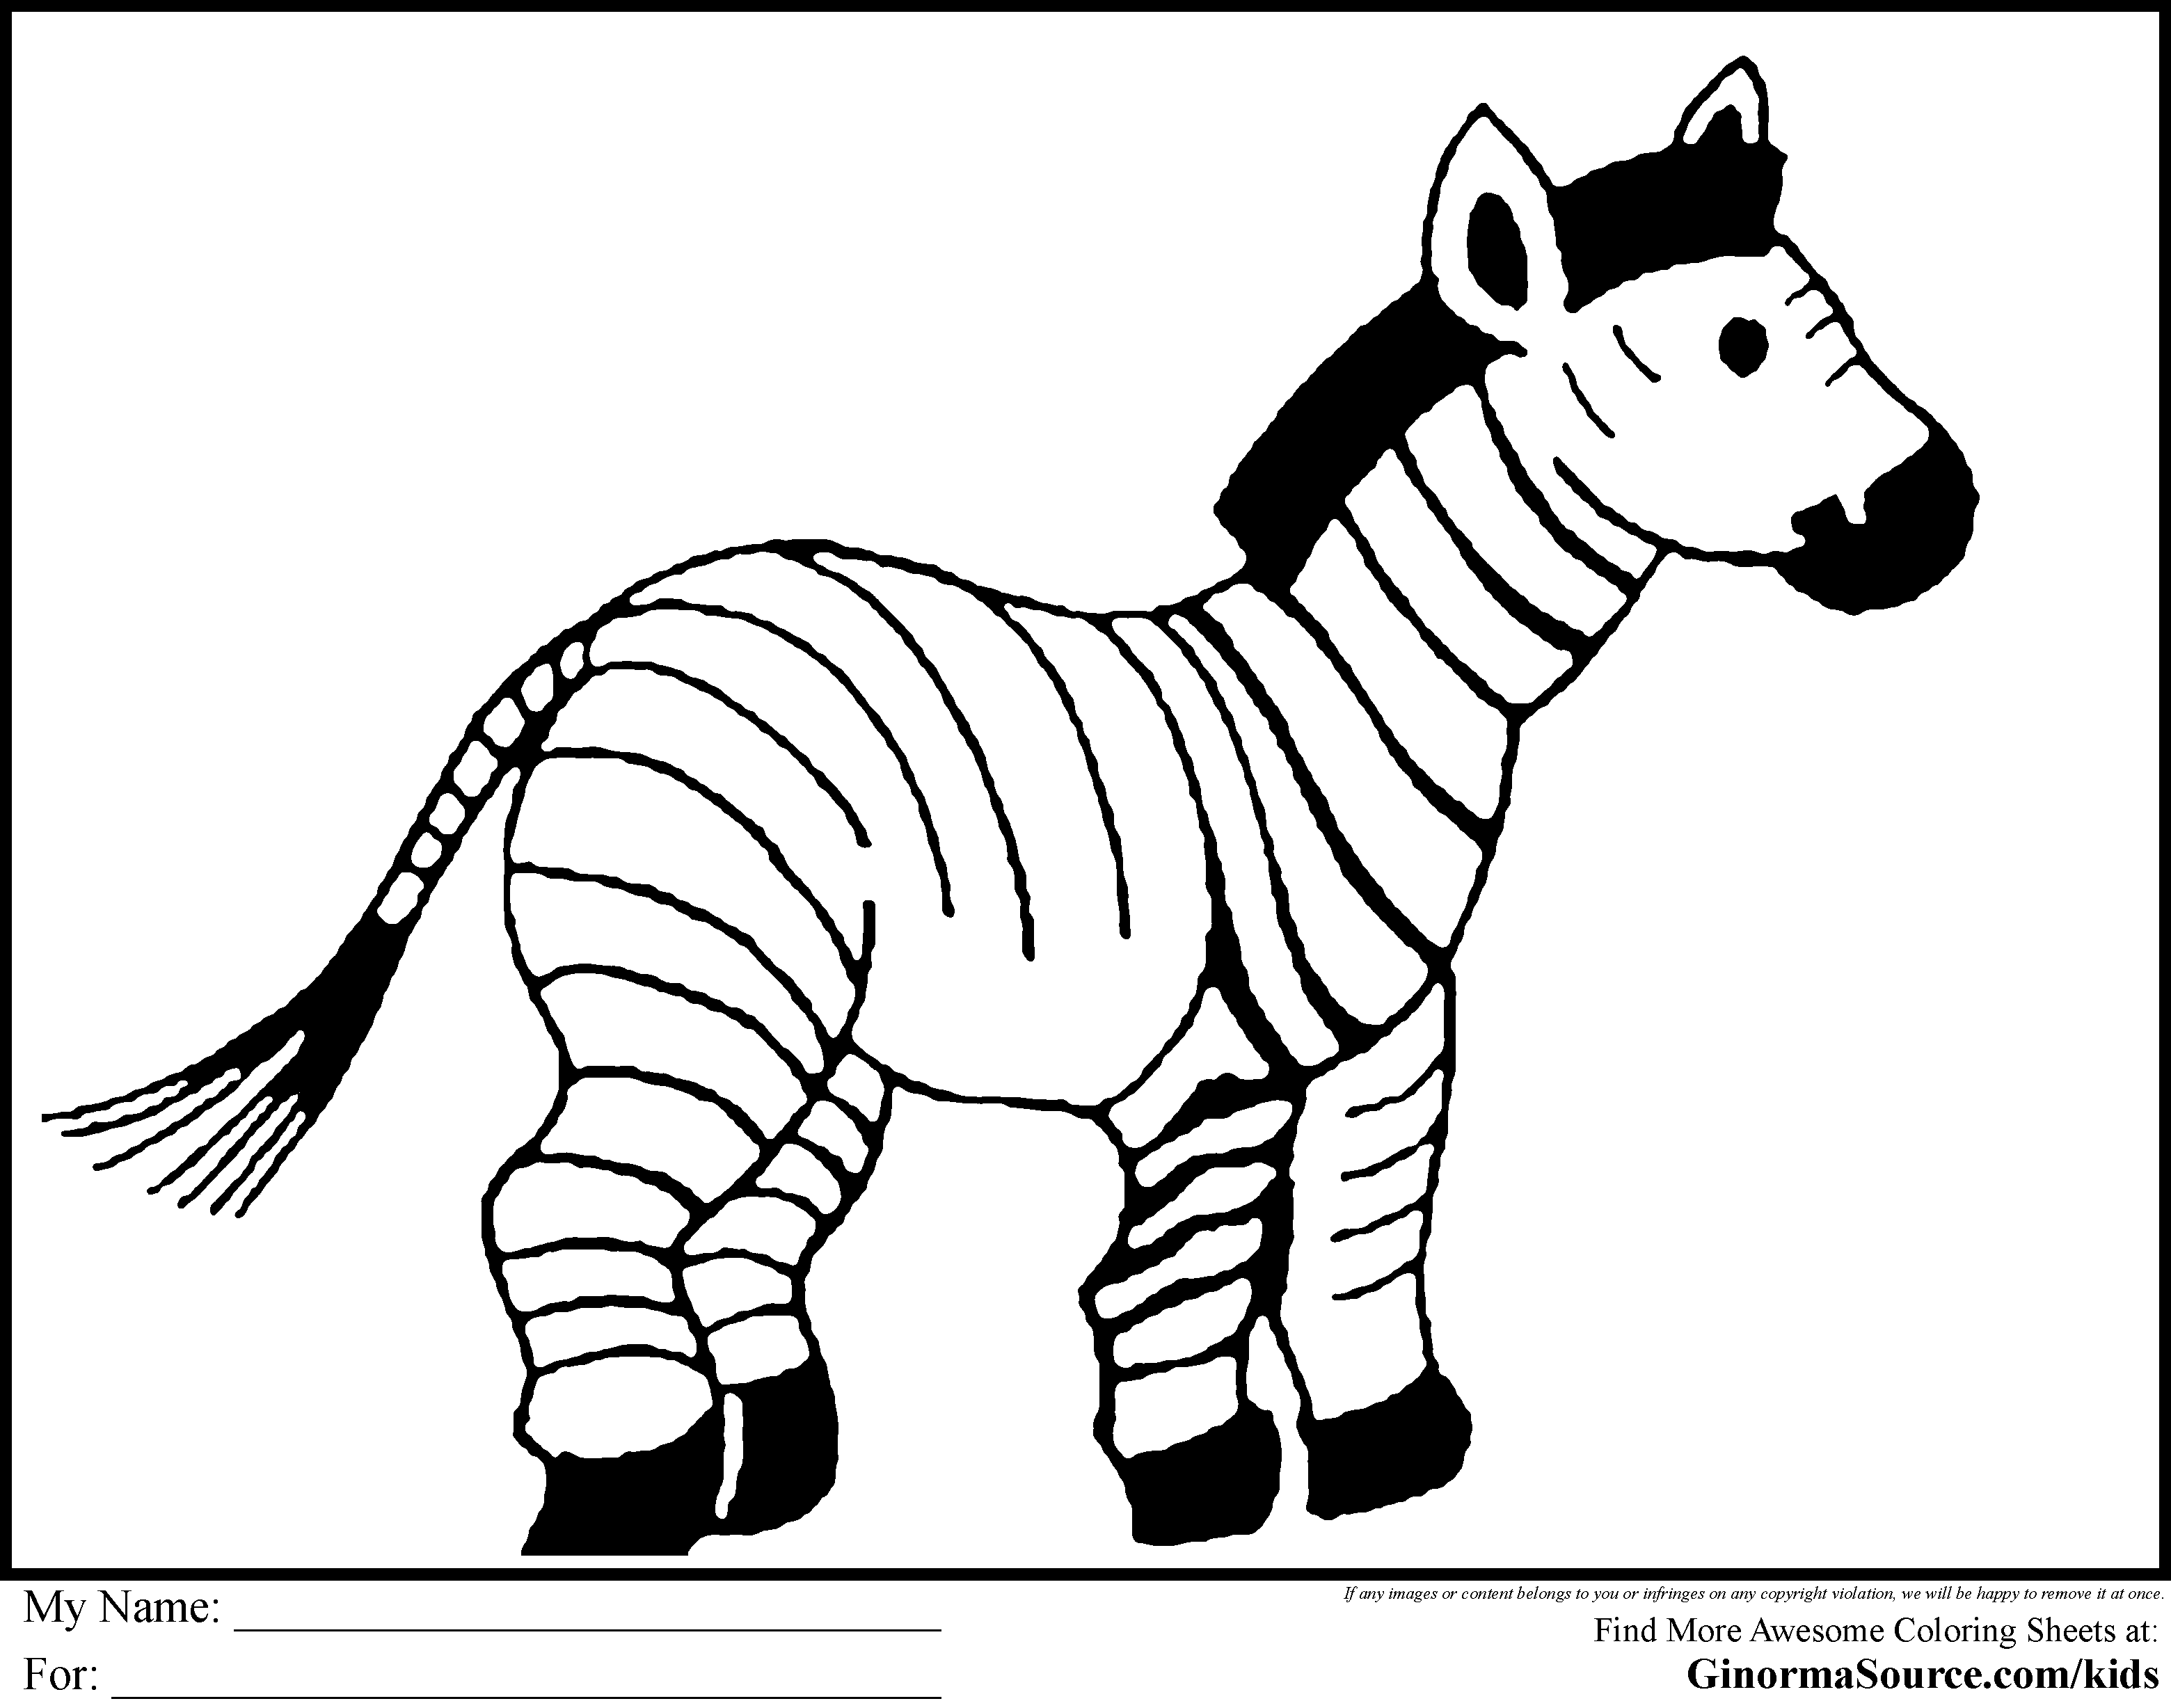 Cute Zoo Animal Coloring Pages - Coloring Home